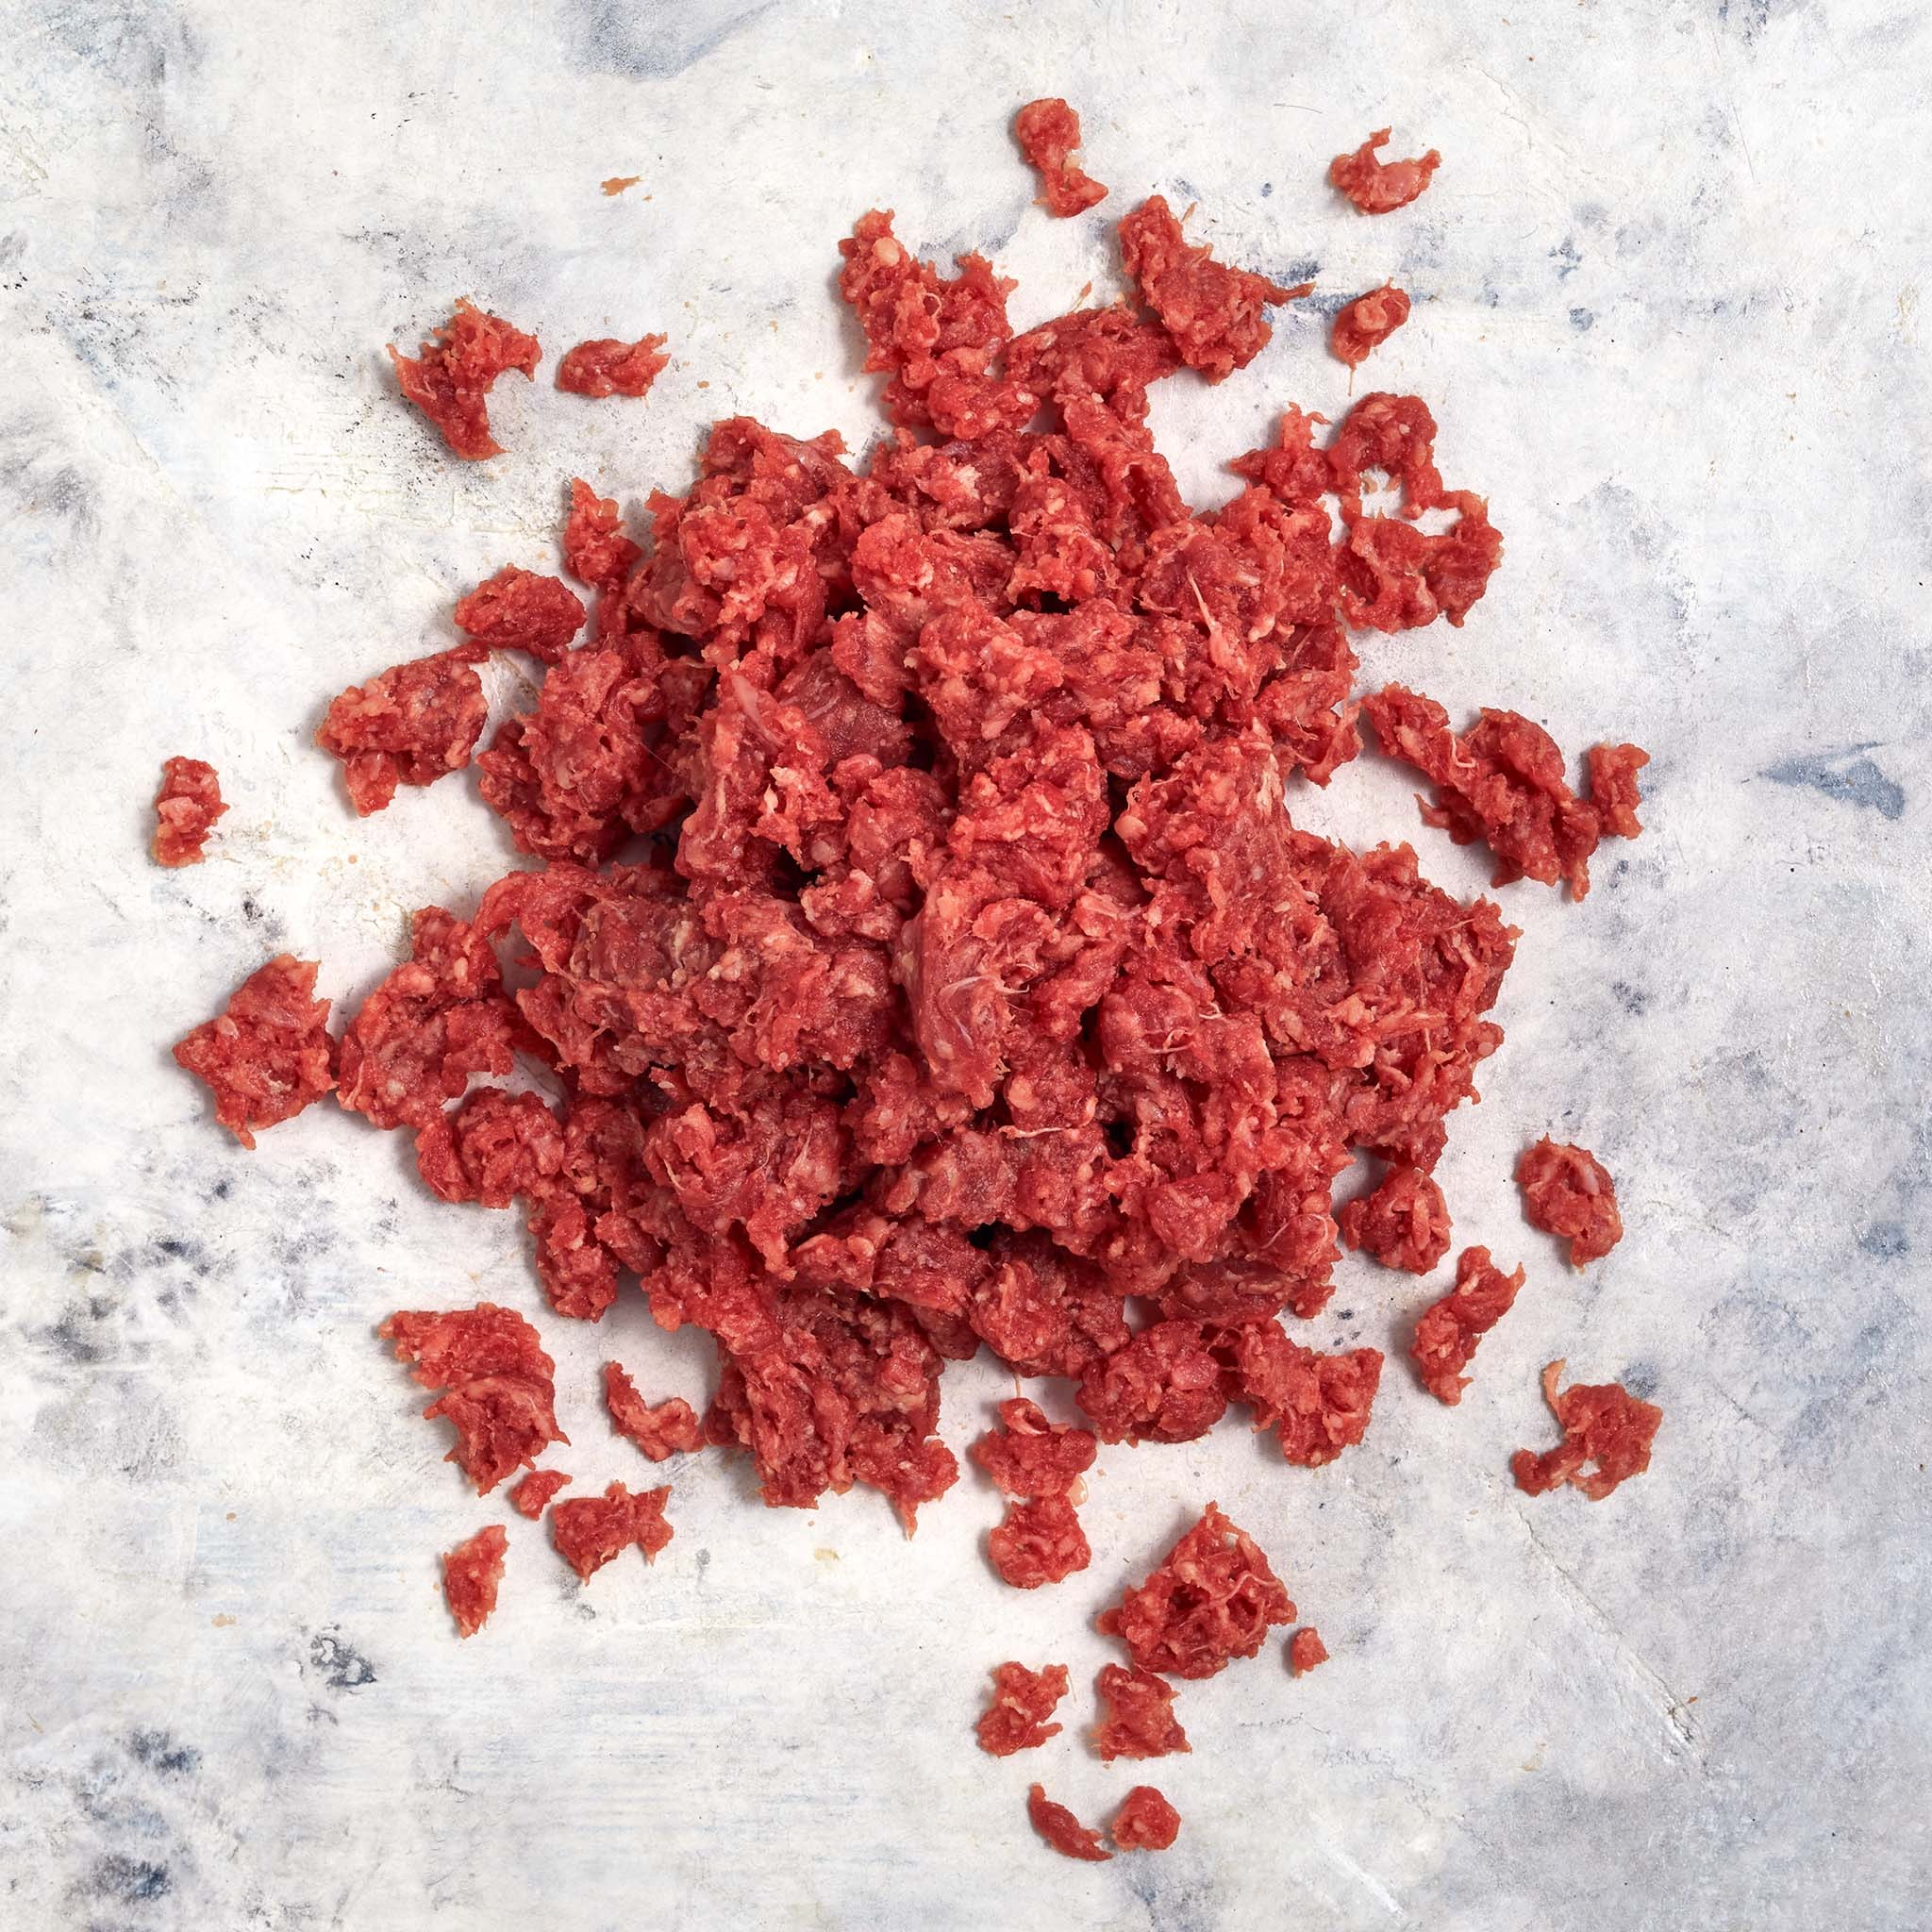 2644 WF RAW Ground Bison 90- Lean - 1 LB Specialty Meats